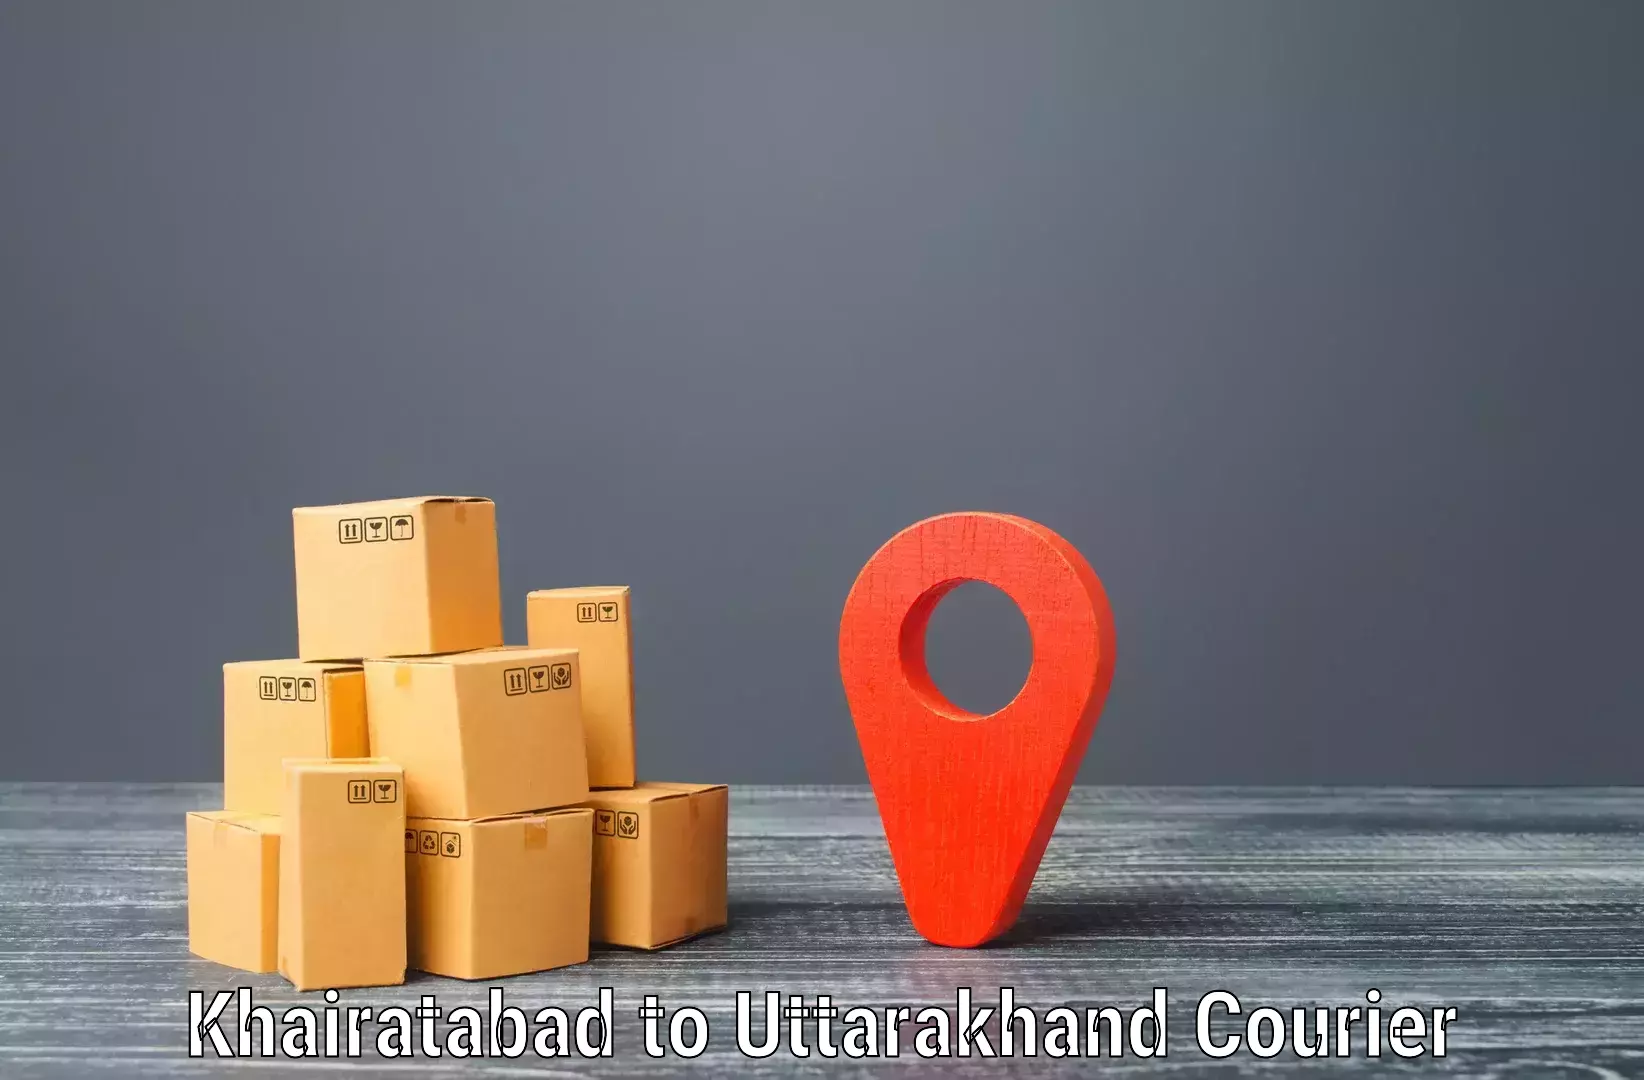 Express delivery network in Khairatabad to Rudraprayag